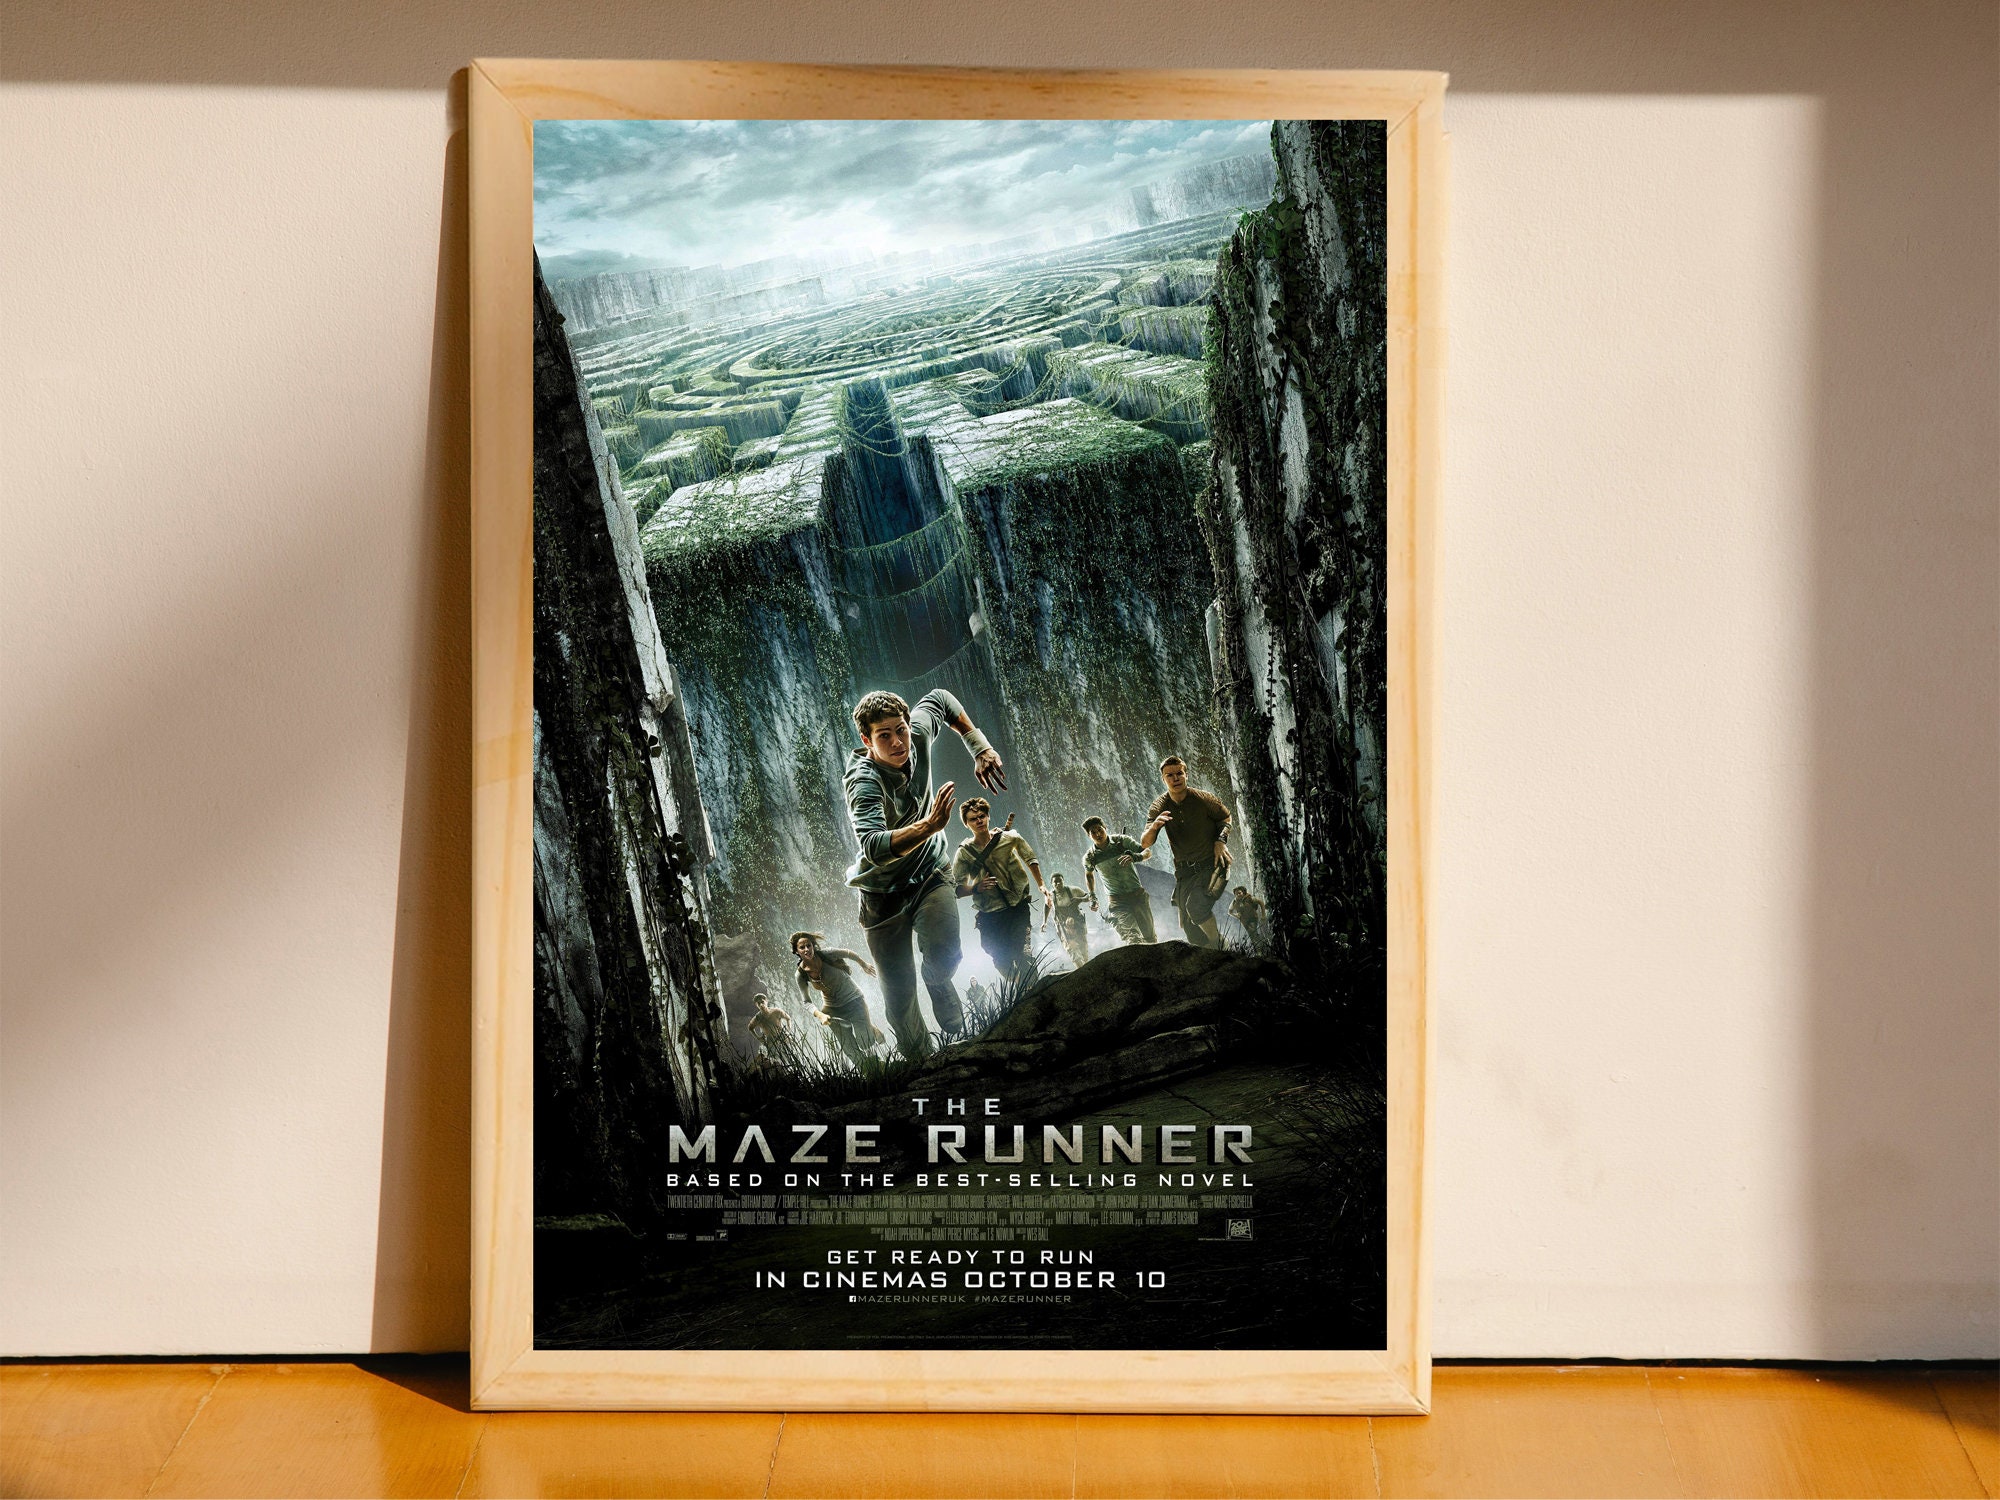 THE MAZE RUNNER CAST SIGNED AUTOGRAPHED 10X 8 RE - PHOTO PRINT O'Brien  Poulter